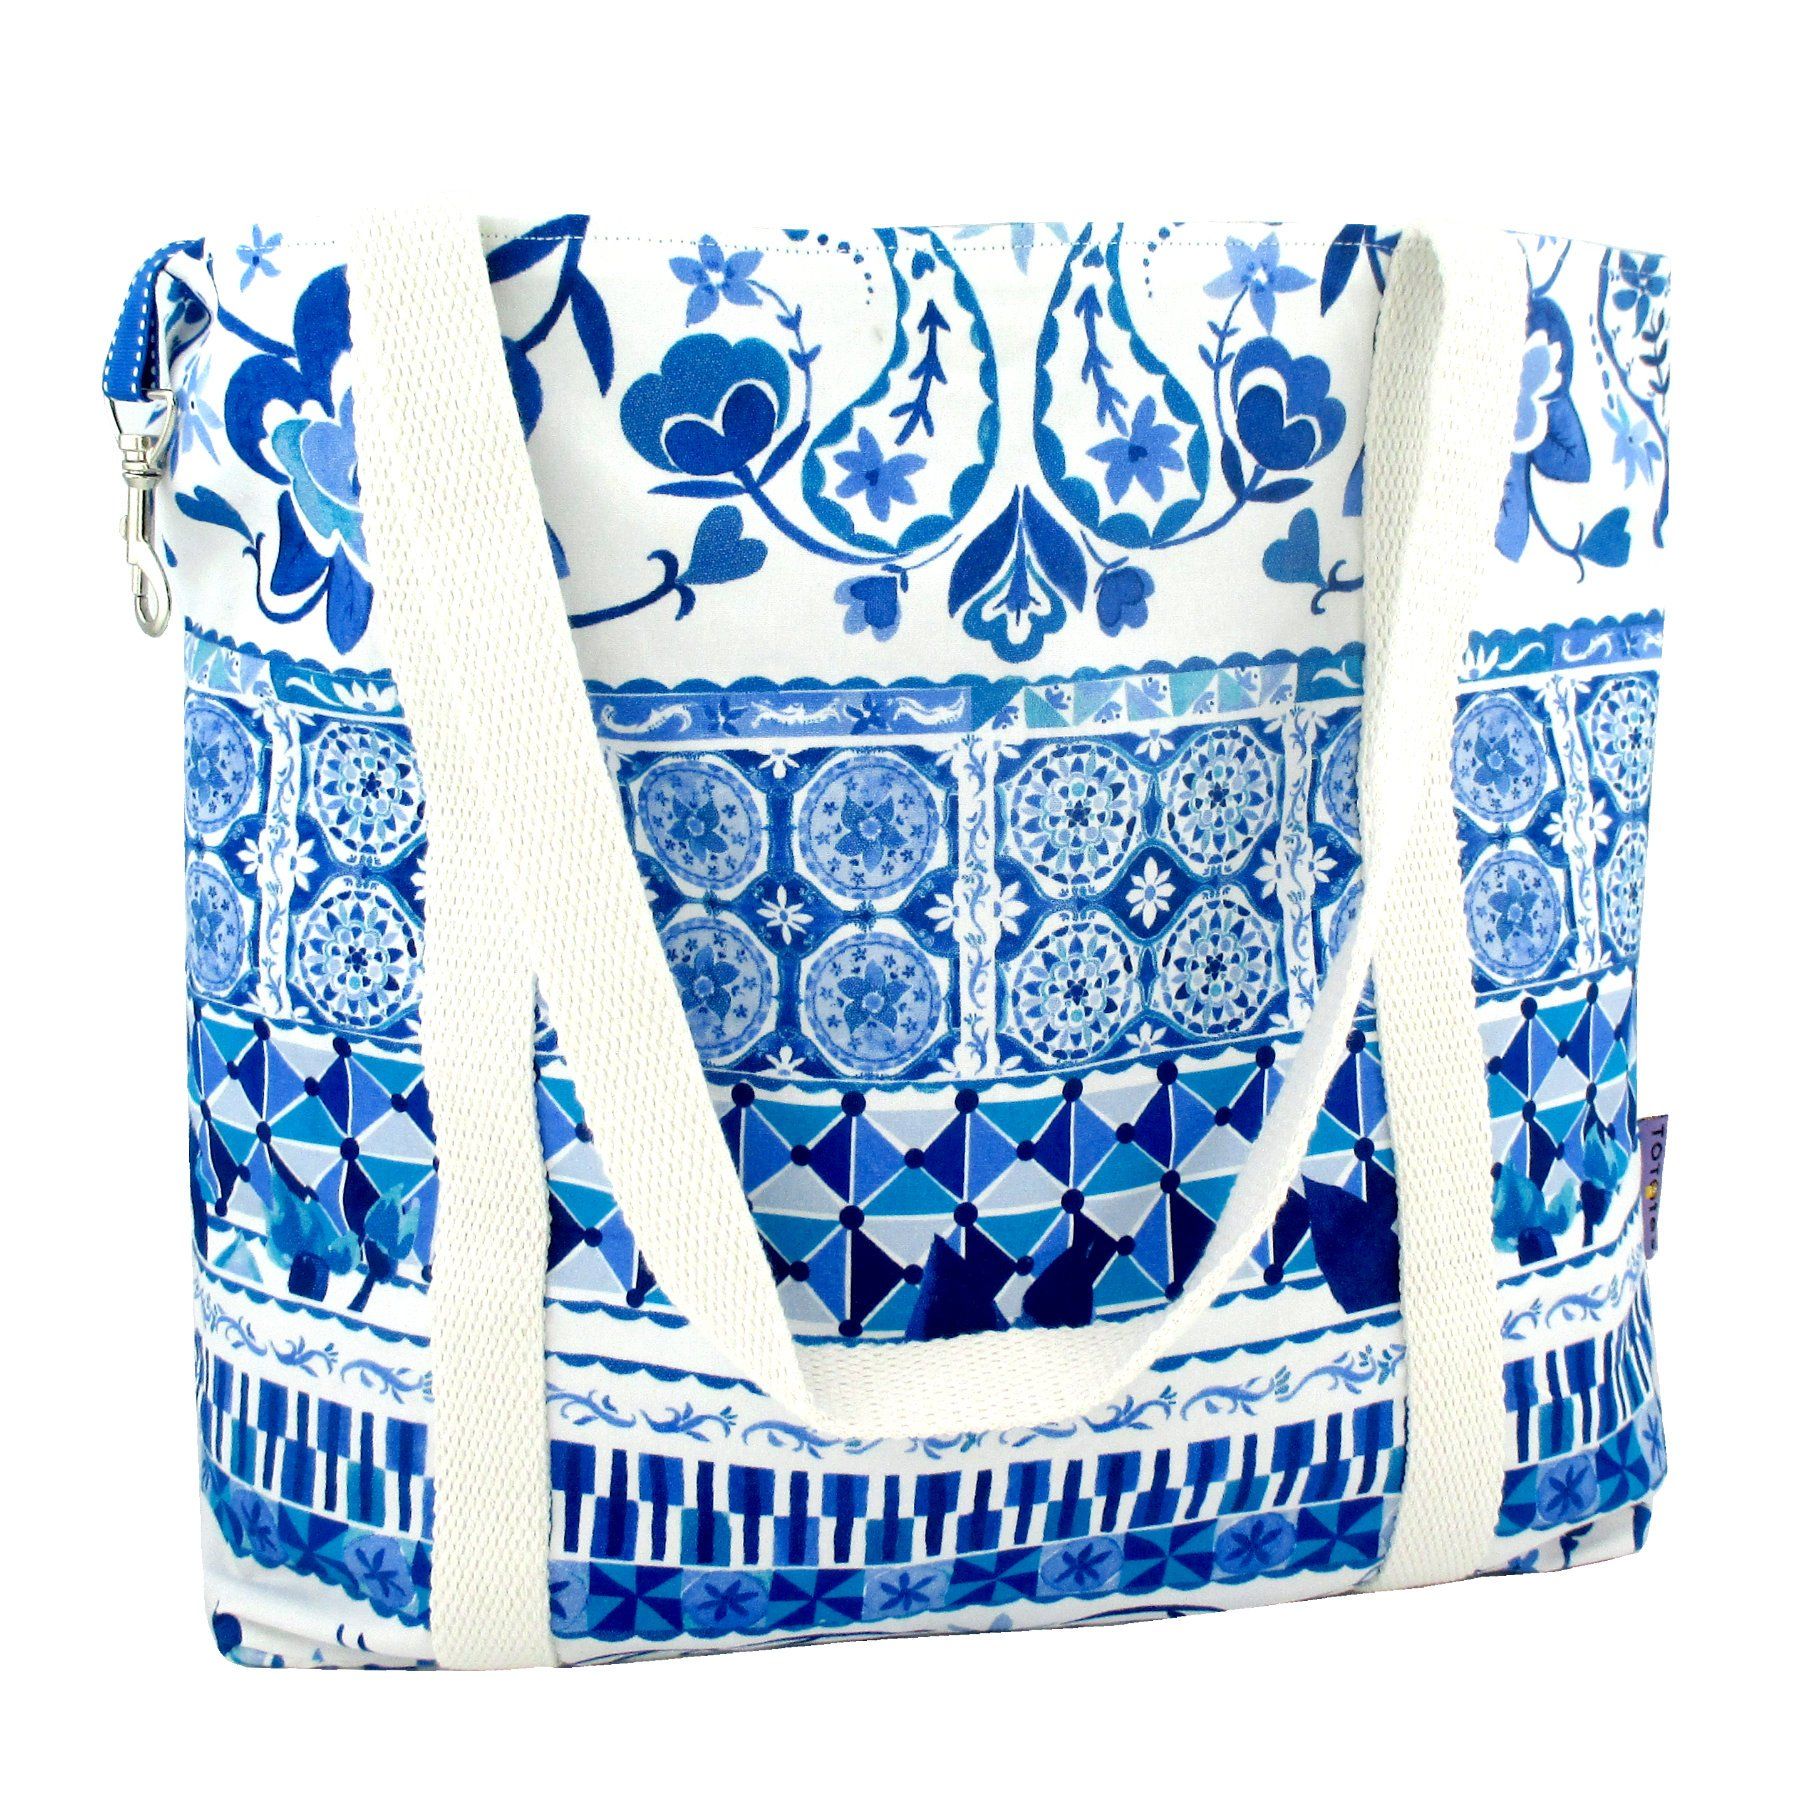 Blue Floral Paisley Mosaic All Over Print Pretty Canvas Tote Bag in White and Blue